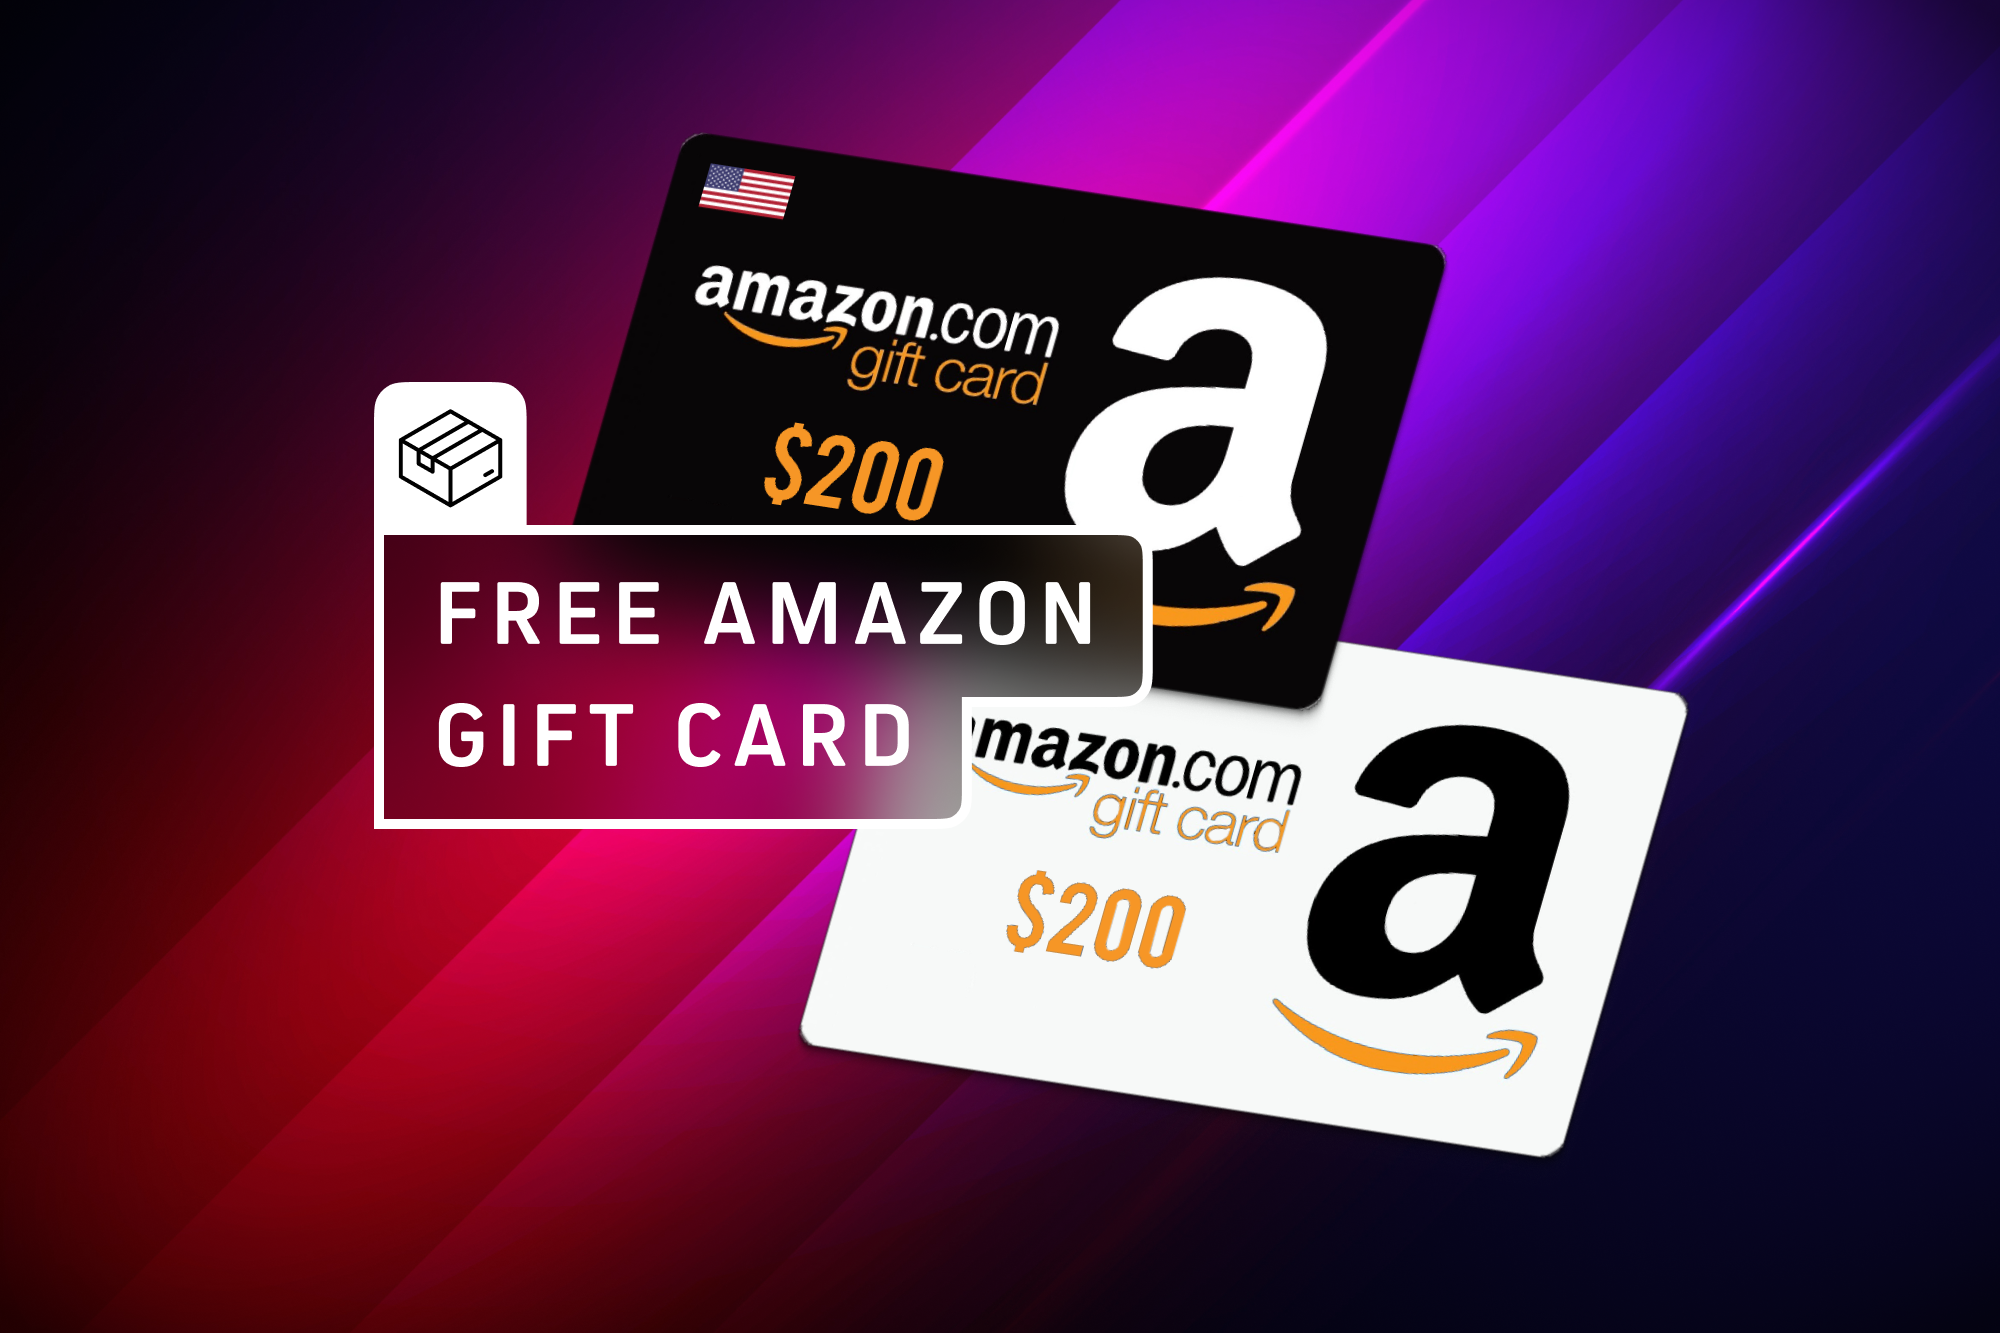 Amazon Prime Day Gift Card Deals End Tonight; Stock Up Now - Forbes Vetted